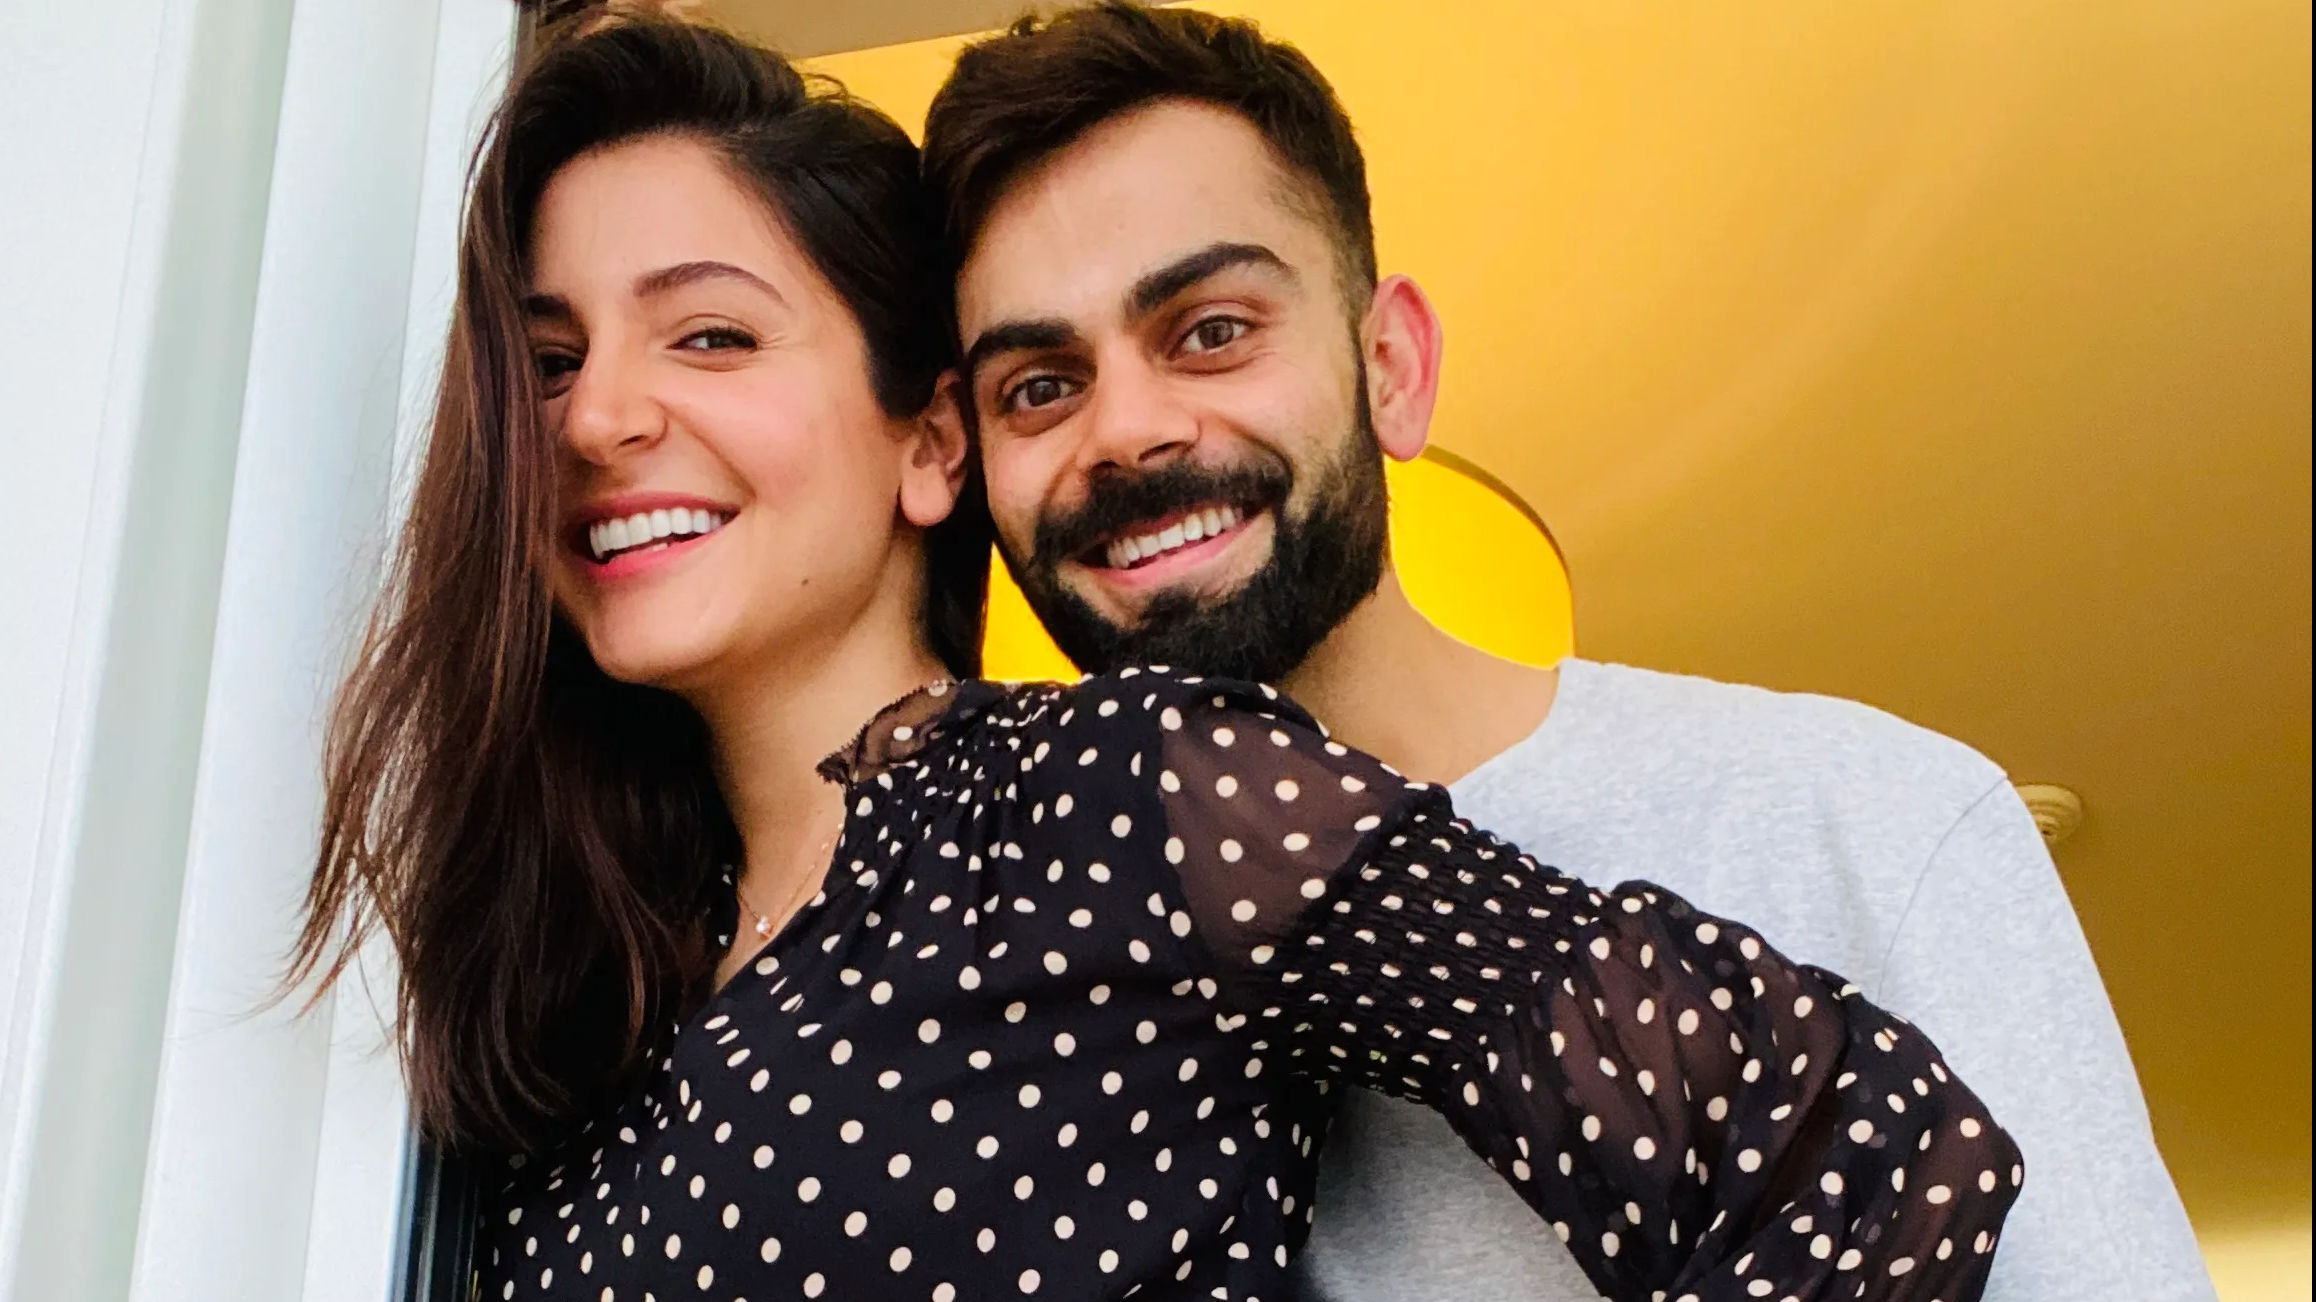 Twitter explodes with congratulatory messages after arrival of Virushka’s daughter